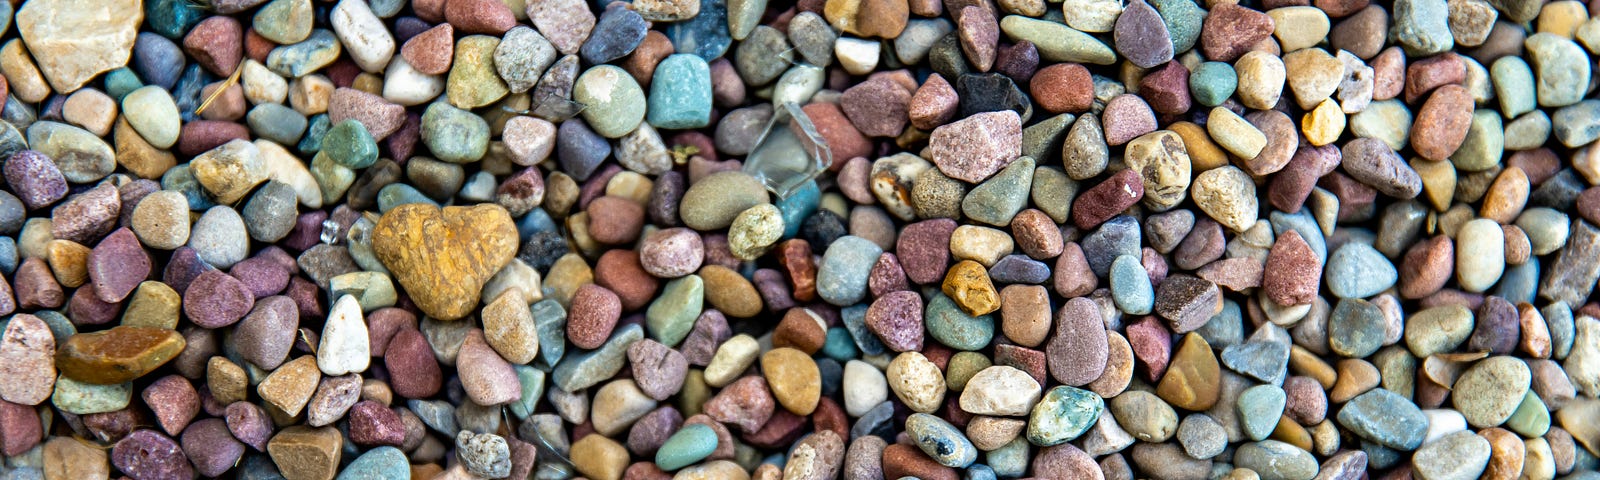 Many colorful pebbles